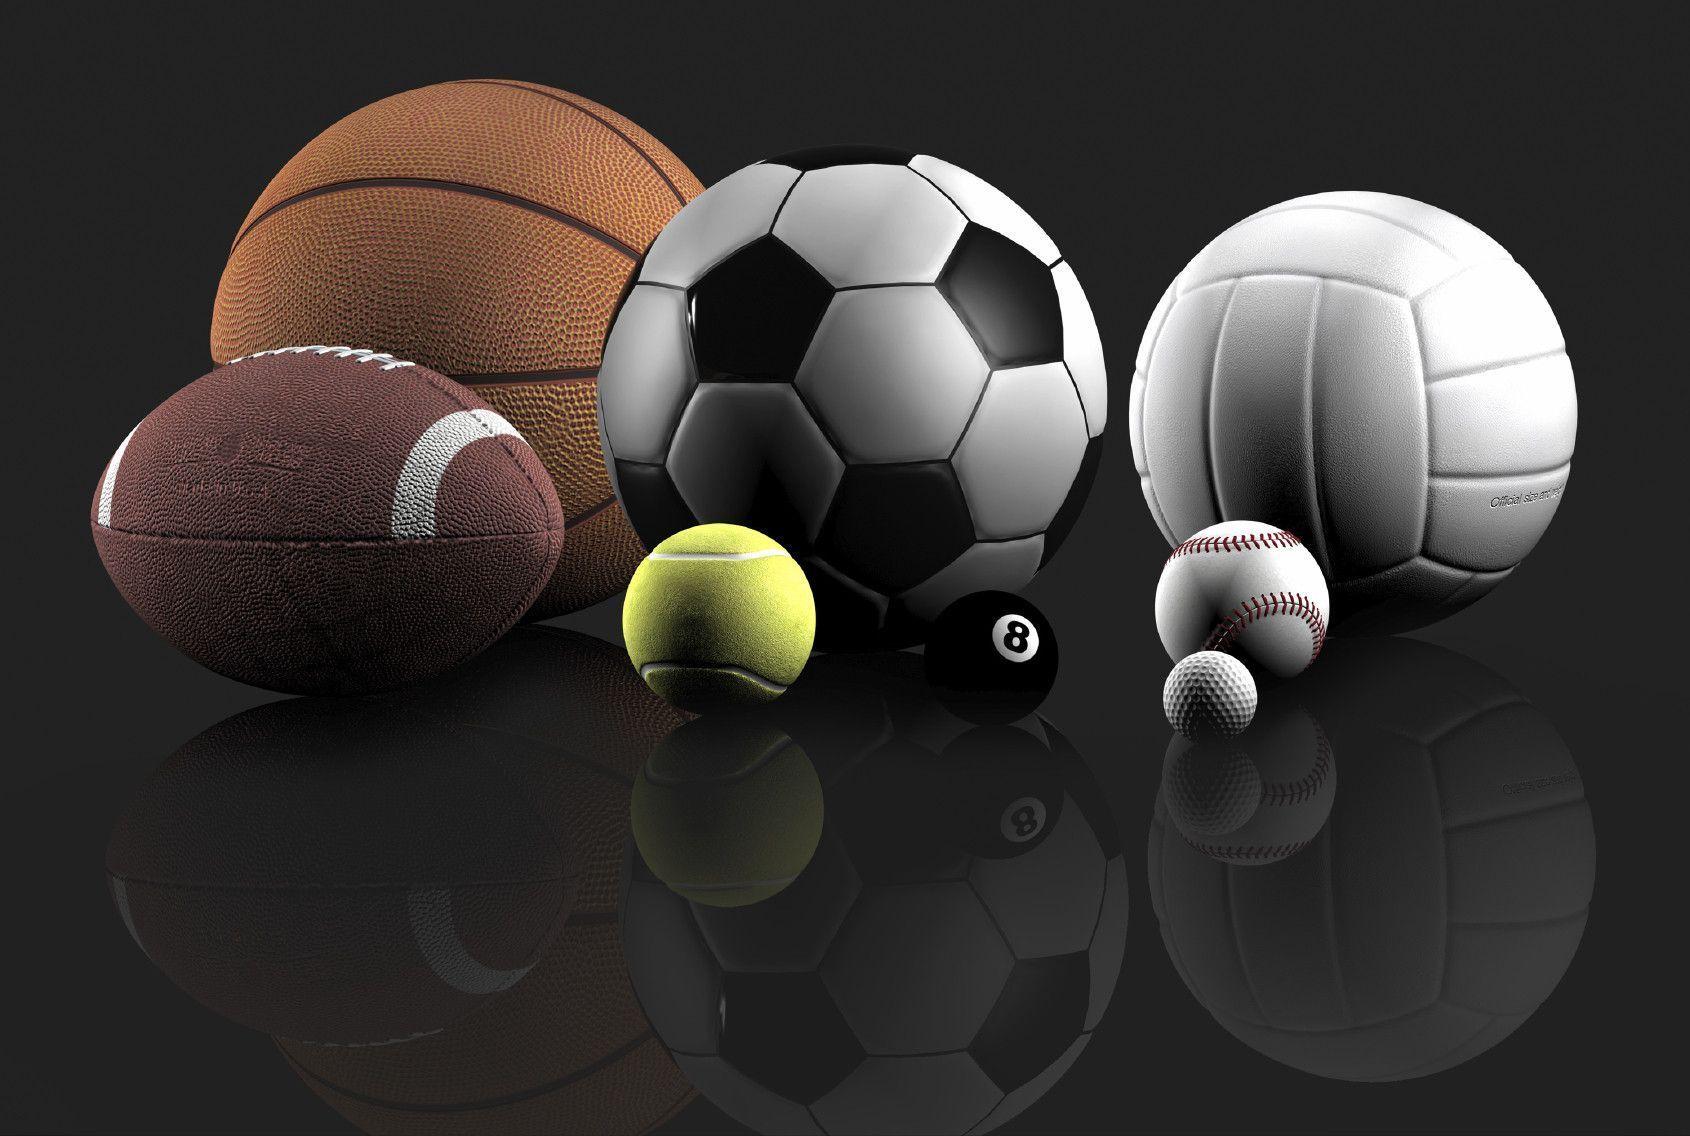 image For > Different Sports Wallpaper